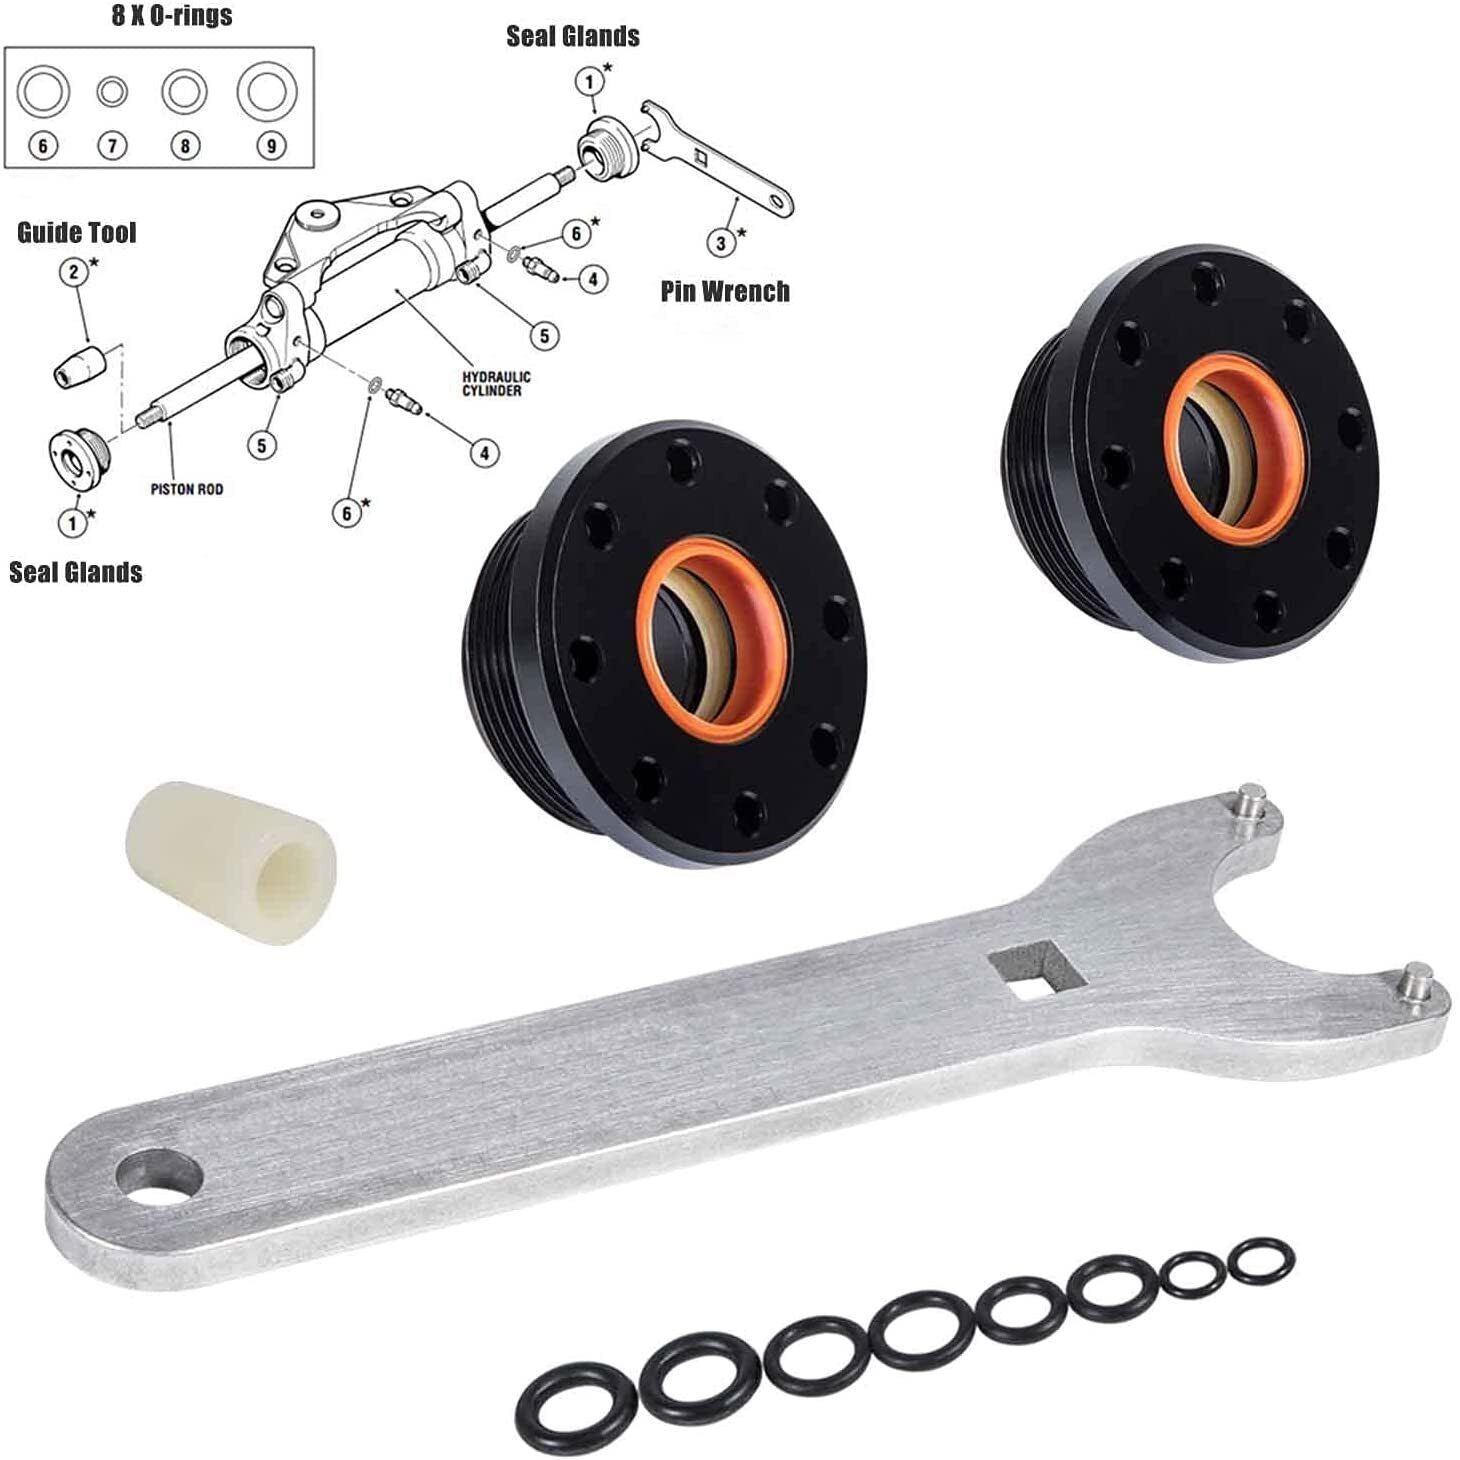 Hydraulic Cylinder Seal Kit with Wrench